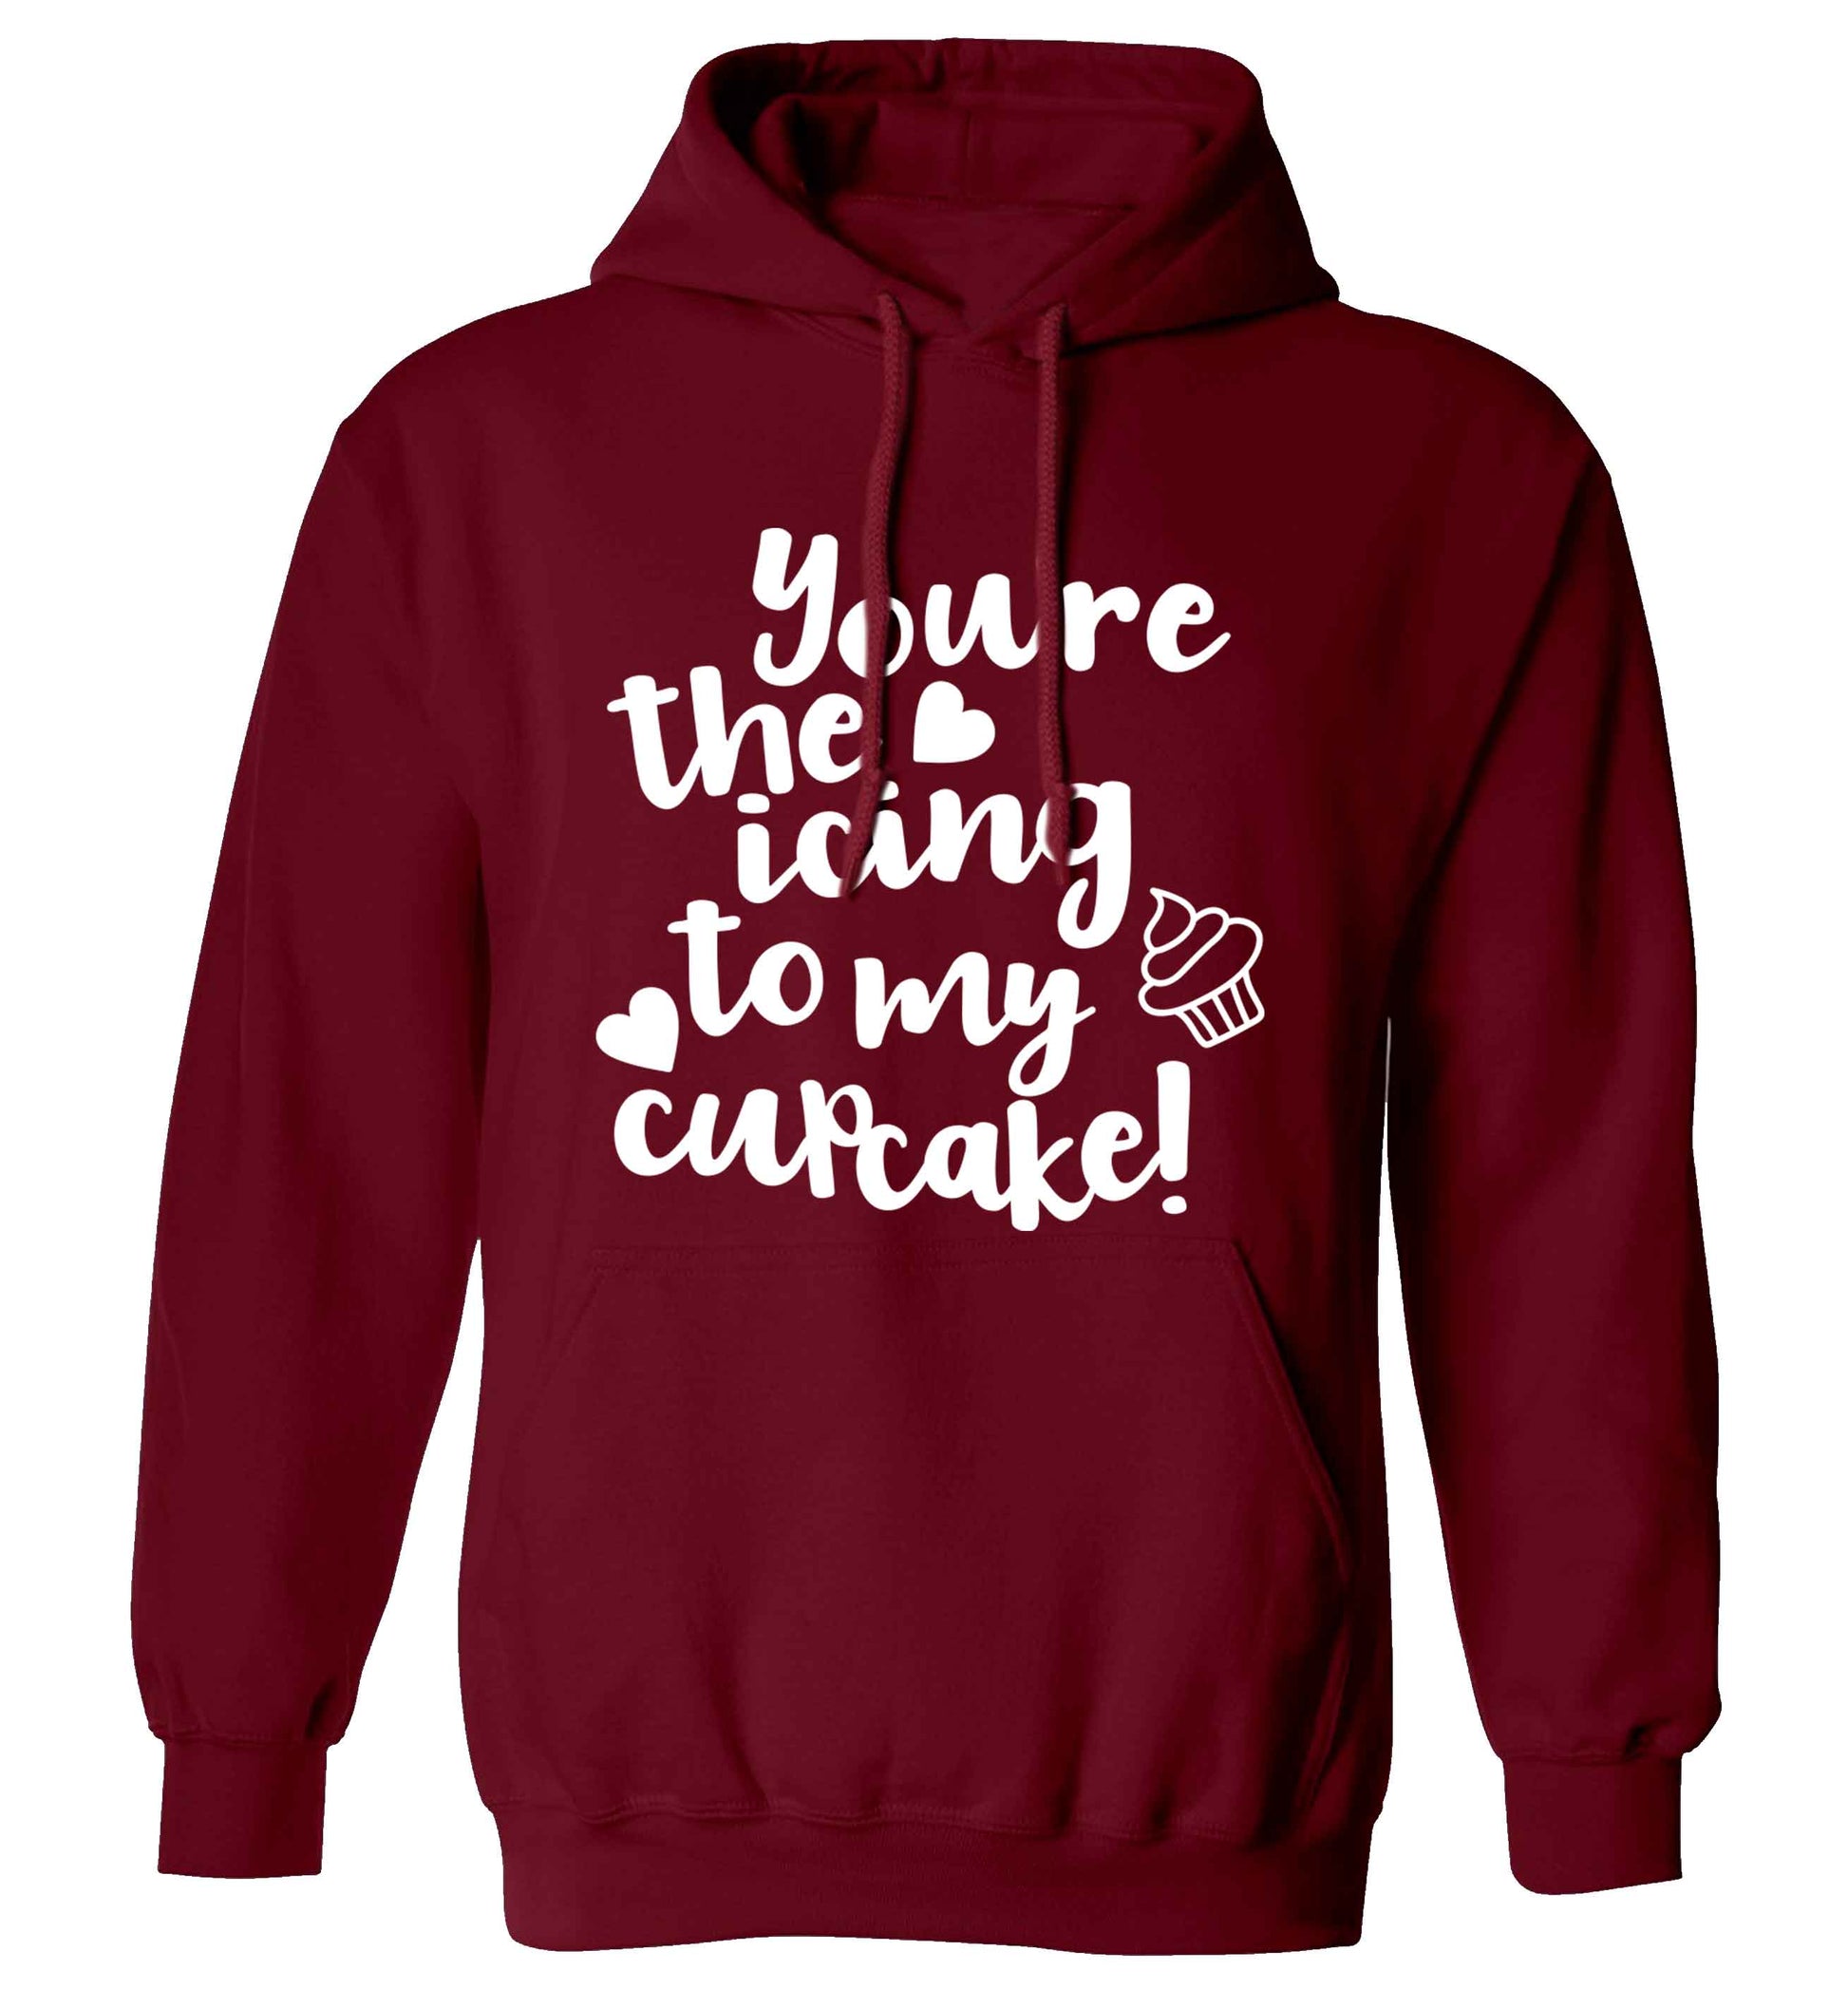 You're the icing to my cupcake adults unisex maroon hoodie 2XL